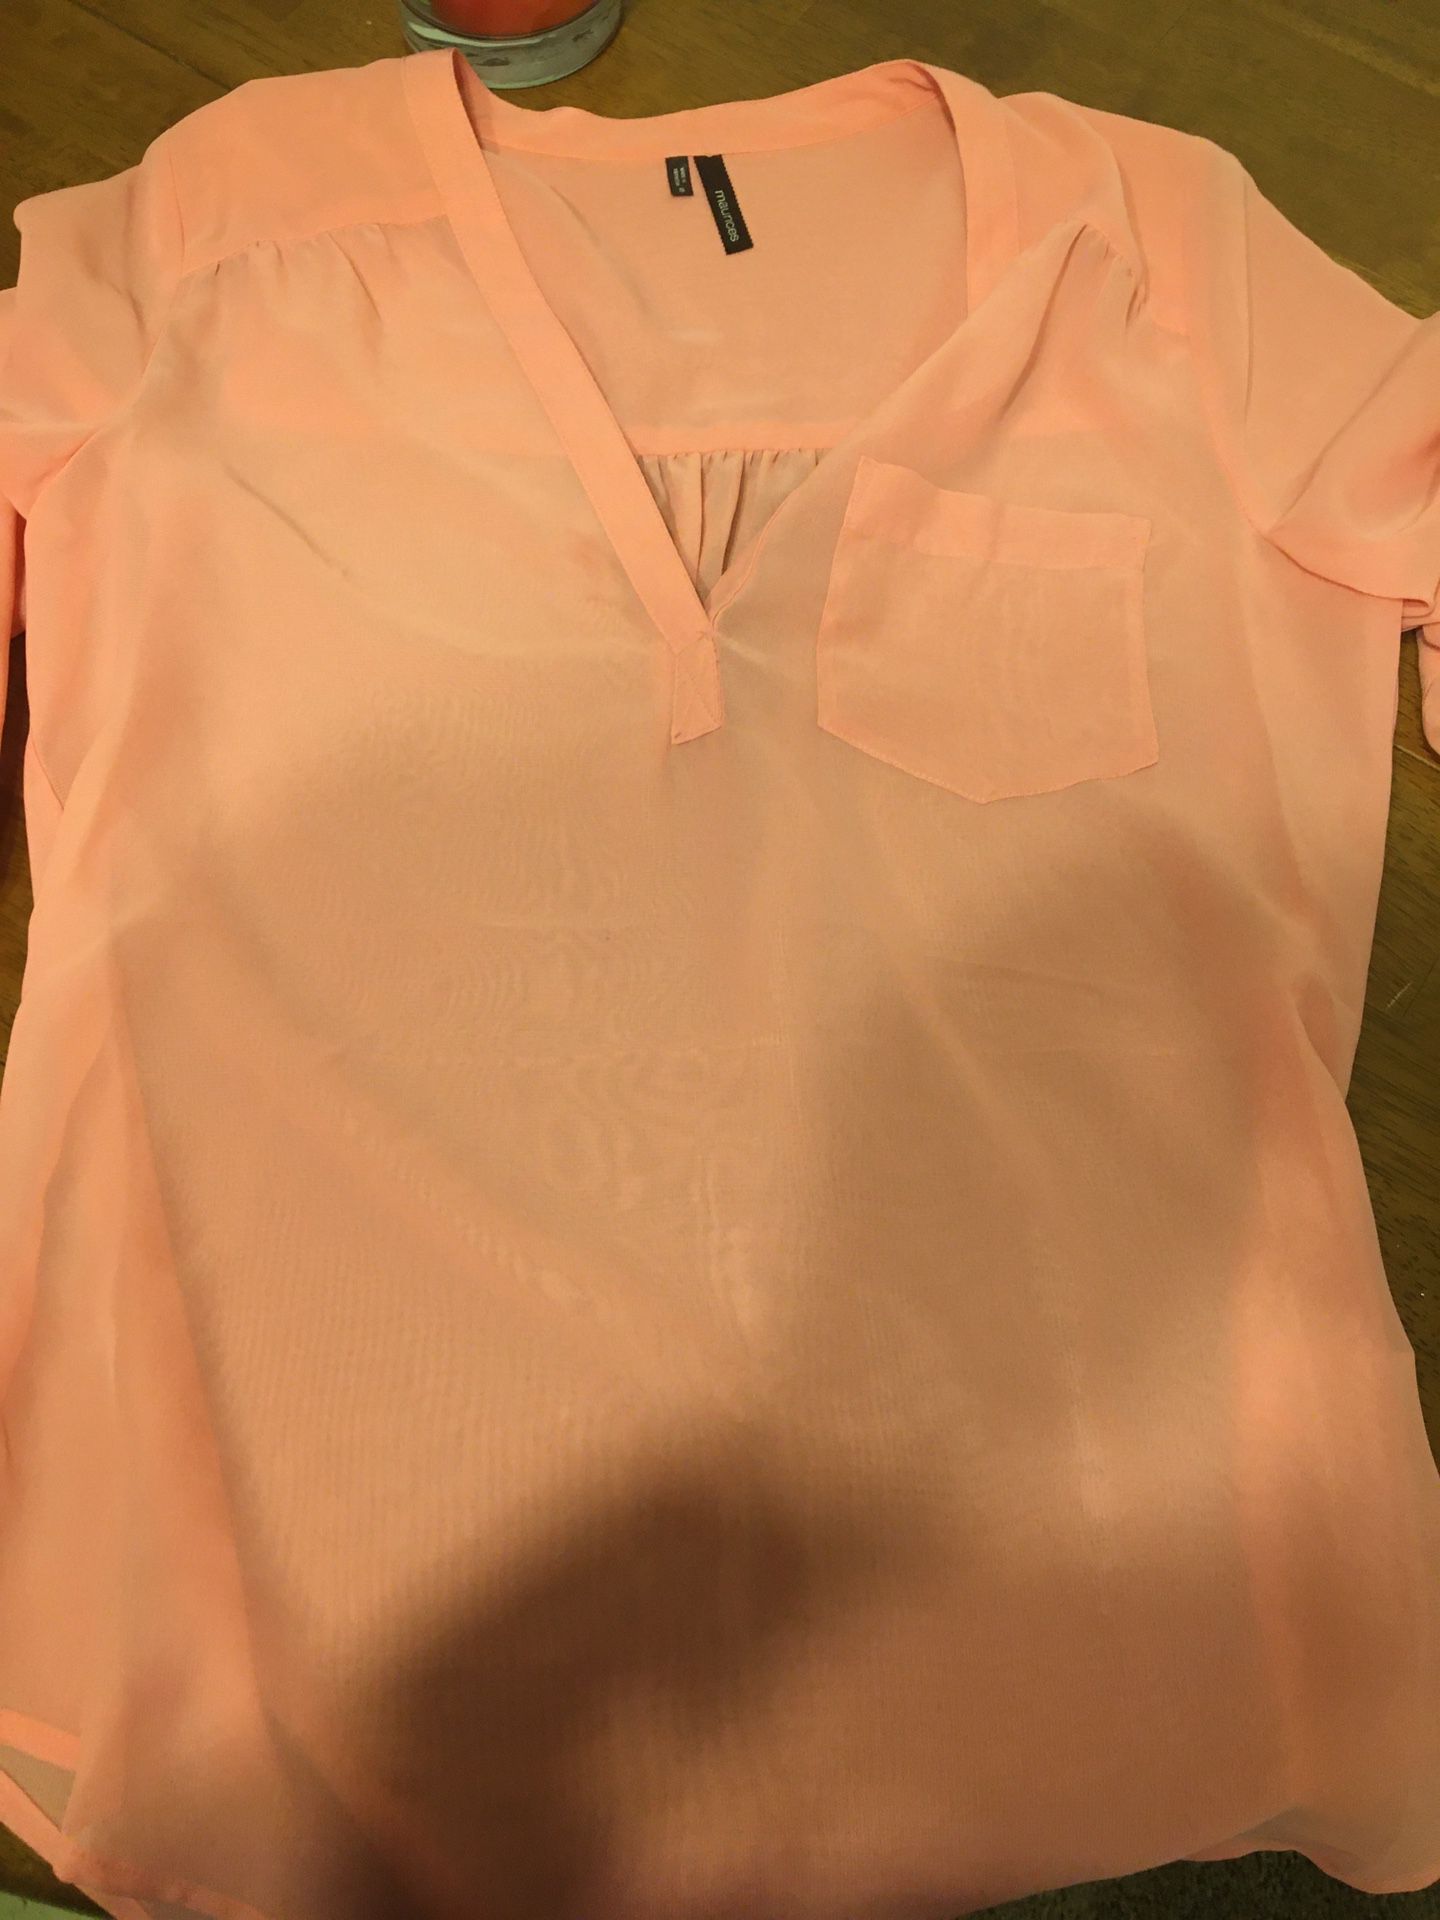 Maurices size small